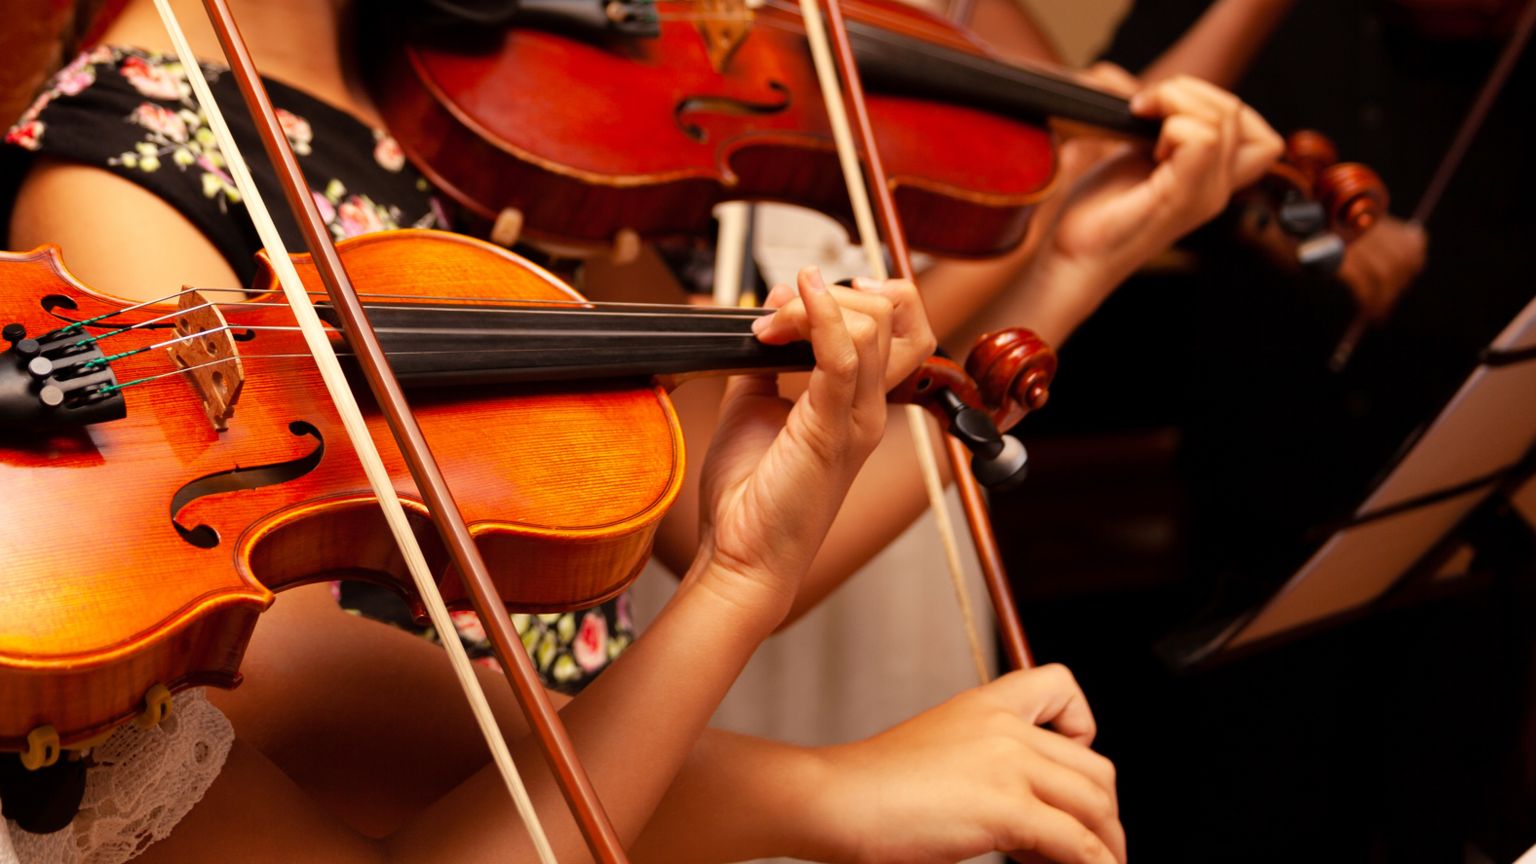 Children playing violins in a youth orchestra